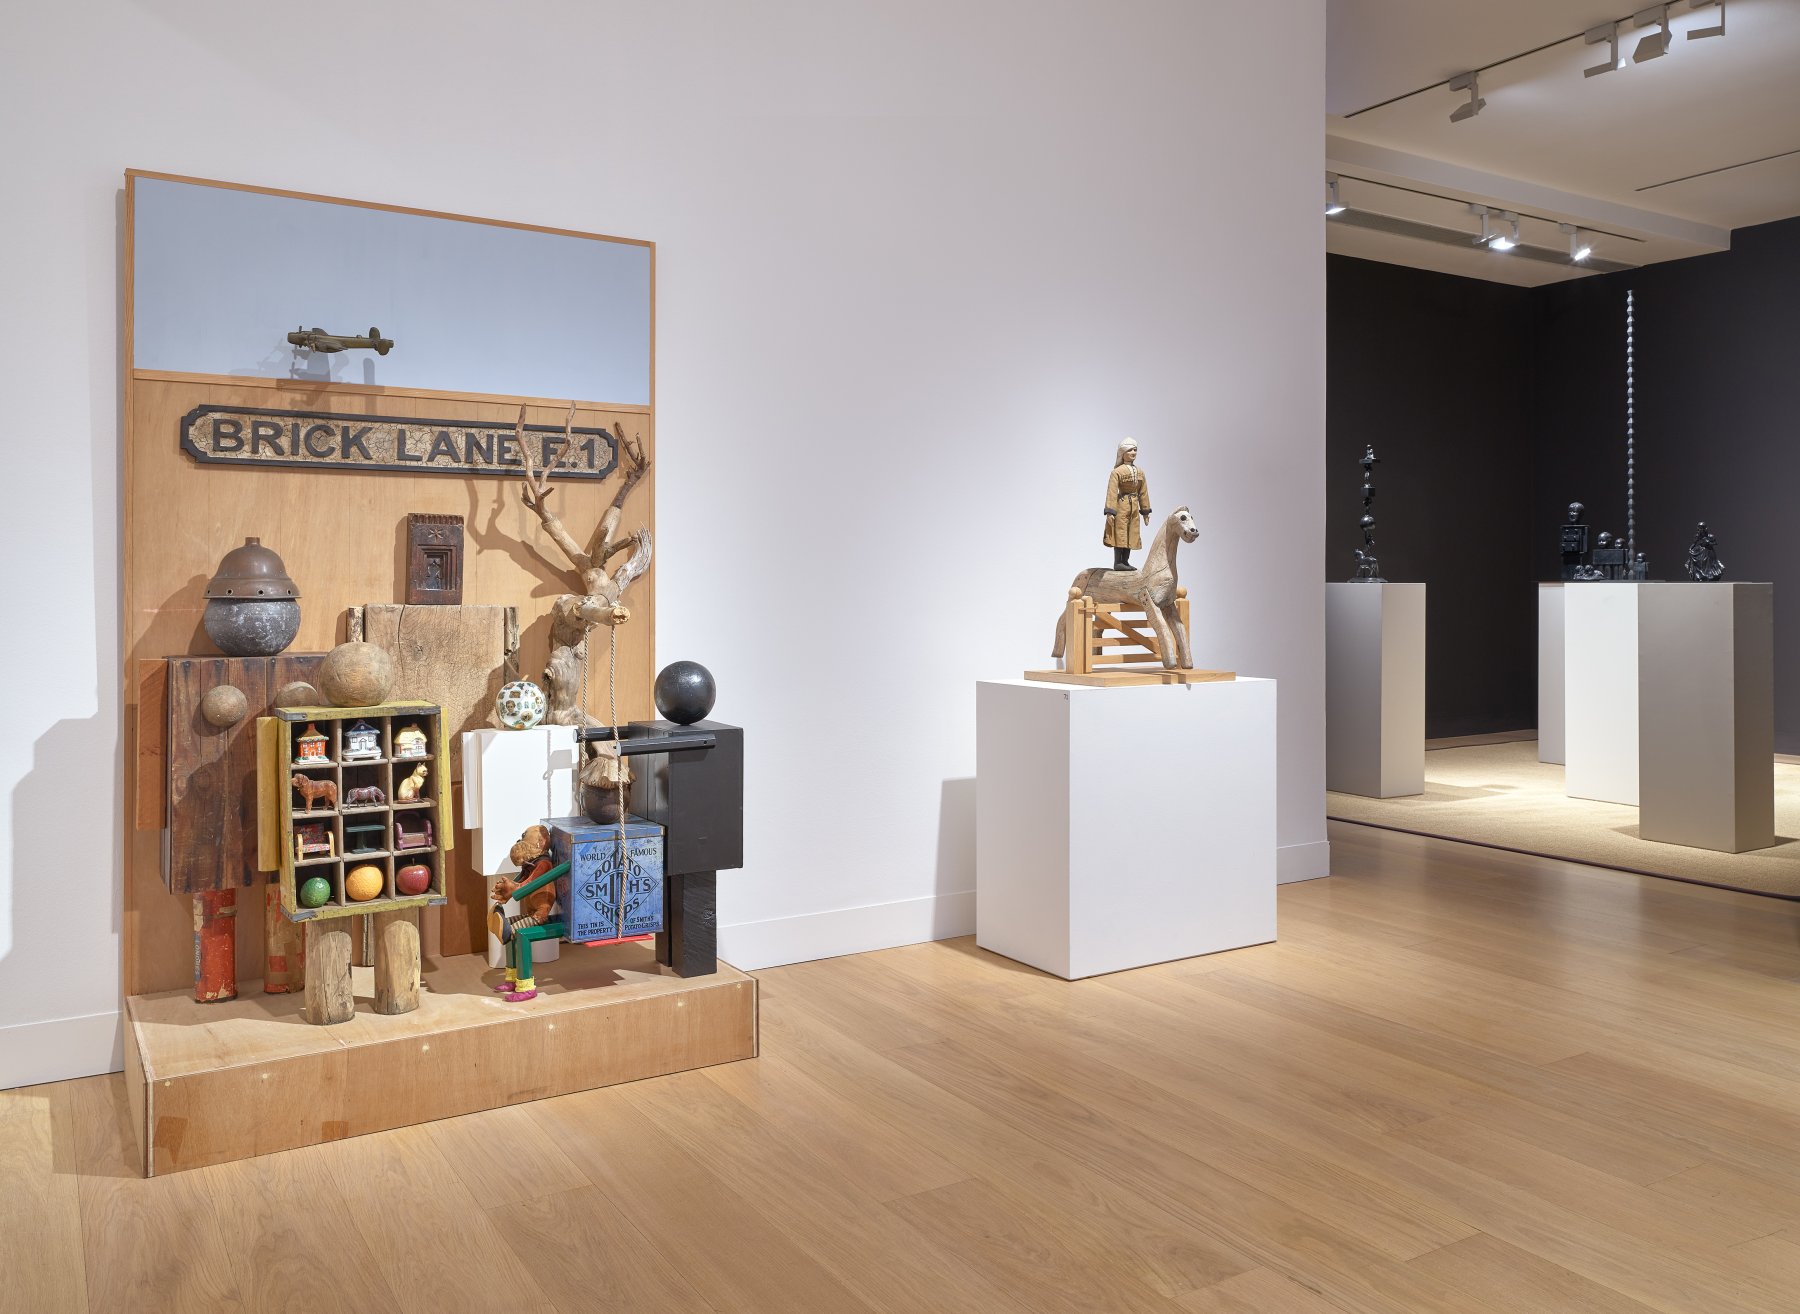 Installation image for Peter Blake: Sculpture and Other Matters, at Waddington Custot